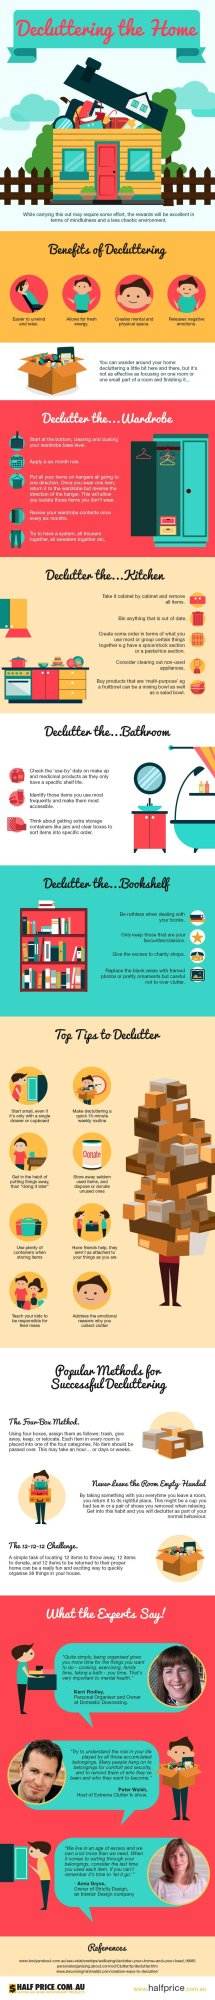 28 Awesome Tips on How To Declutter your Home (Infographic) declutter your home